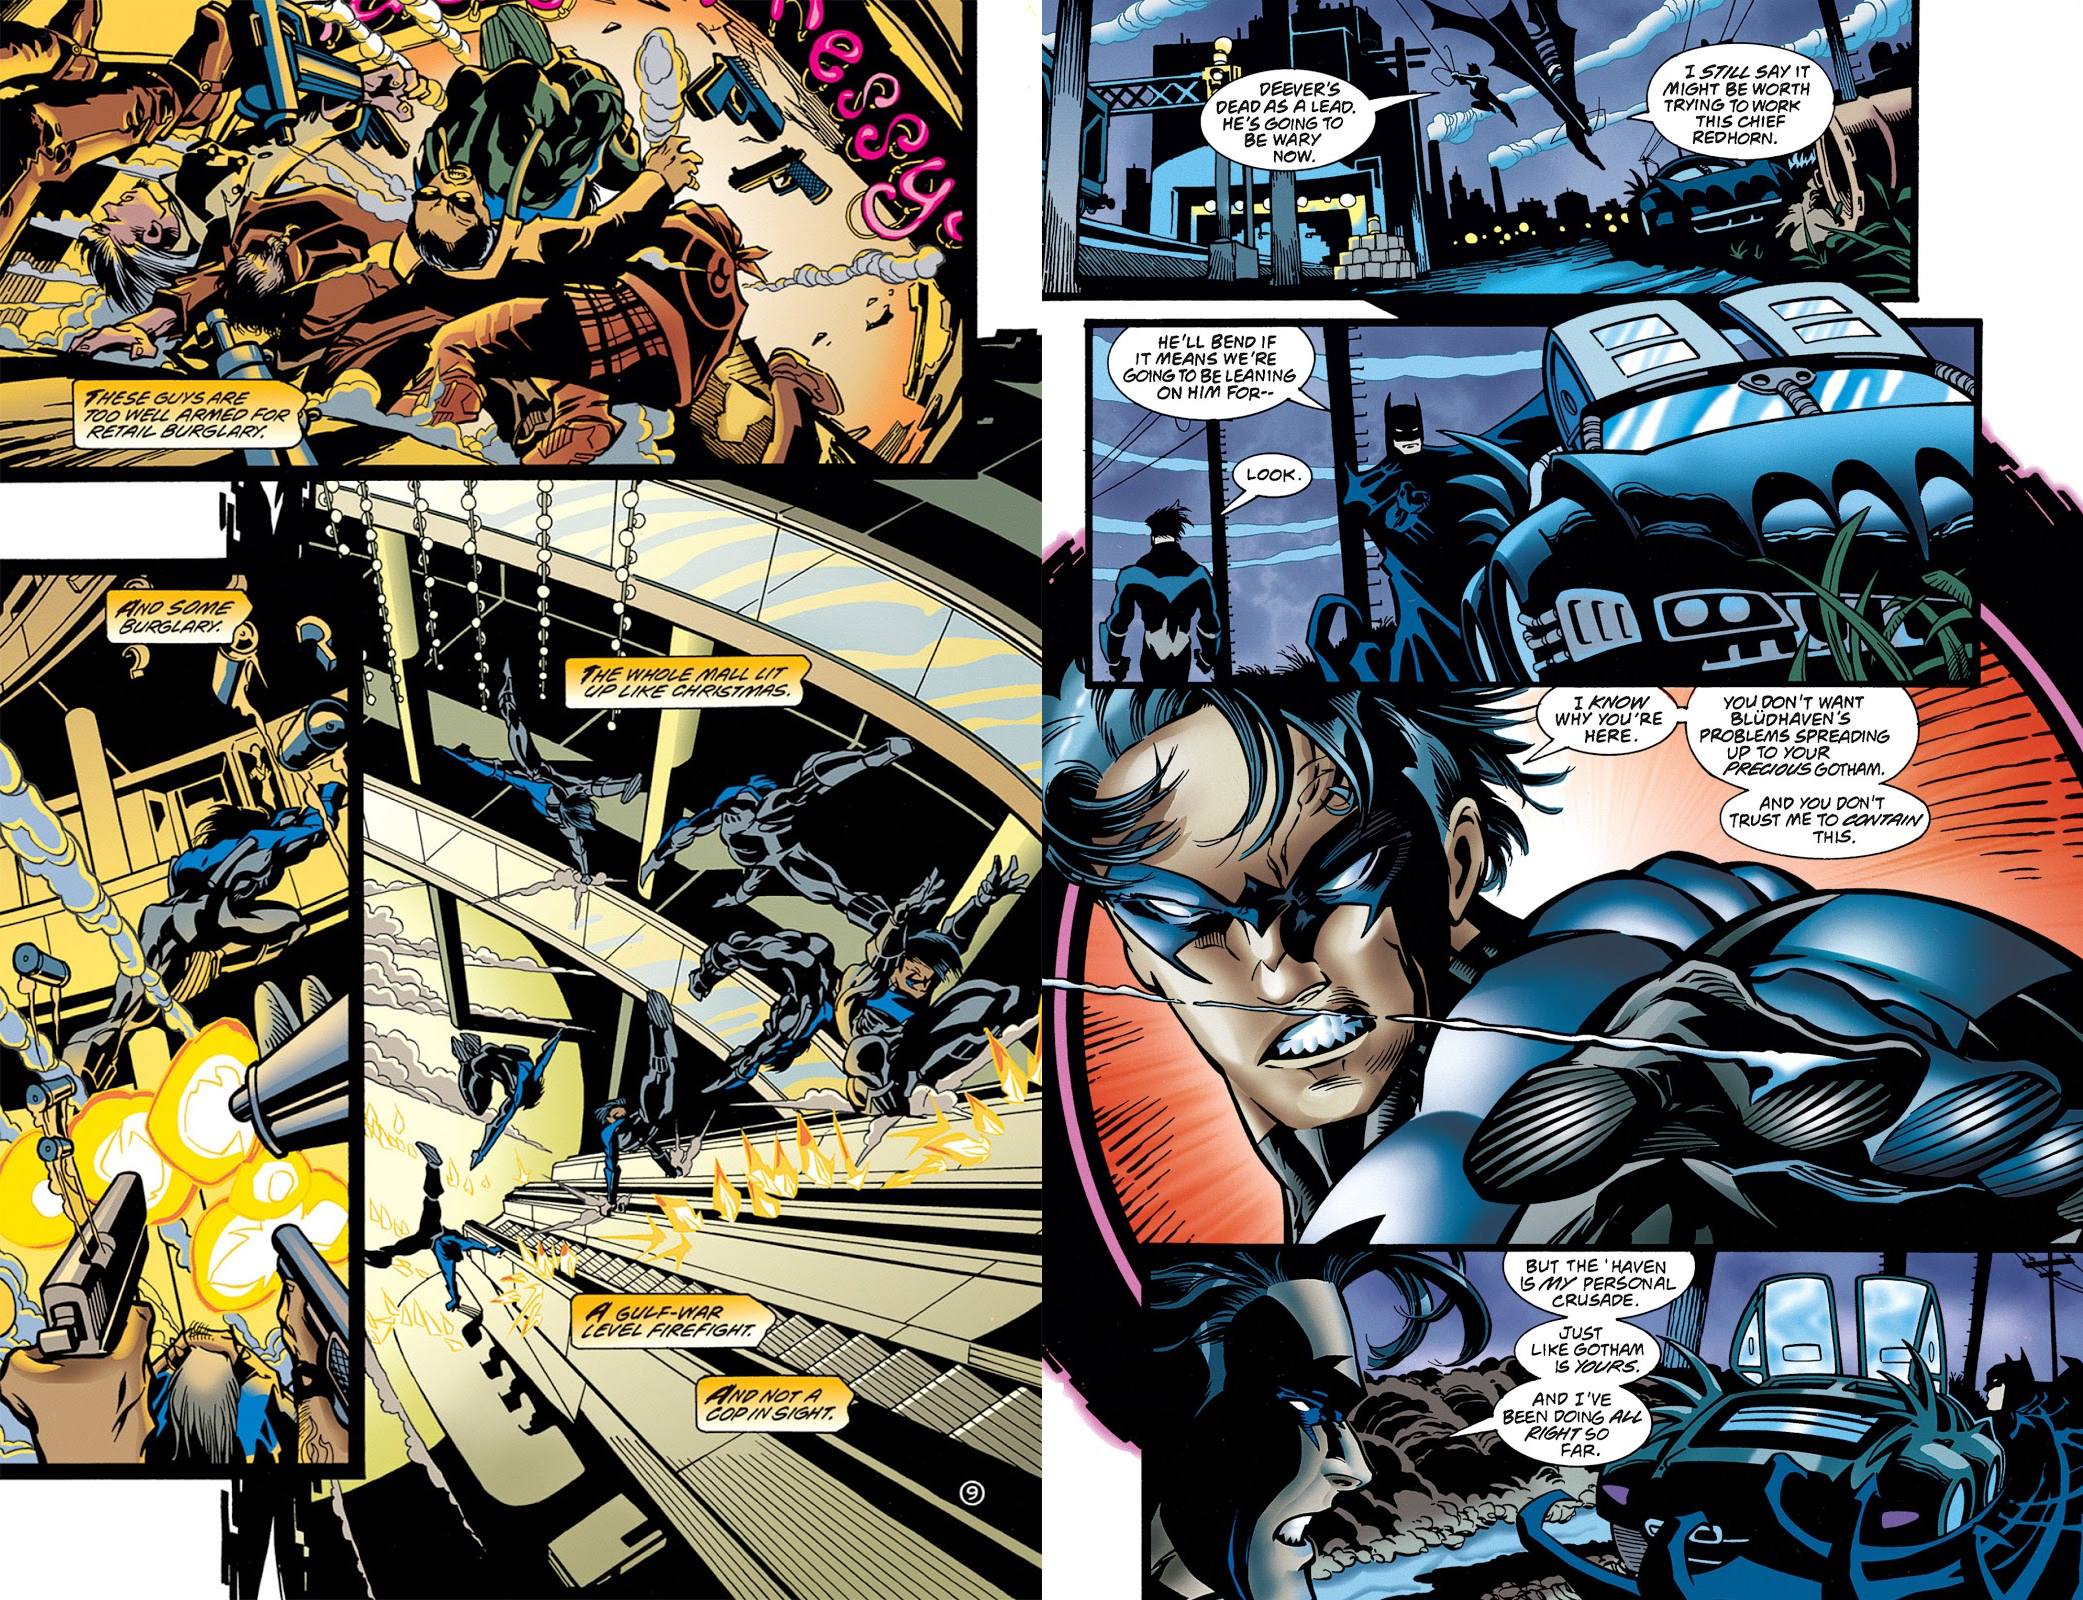 Nightwing Rough Justice review